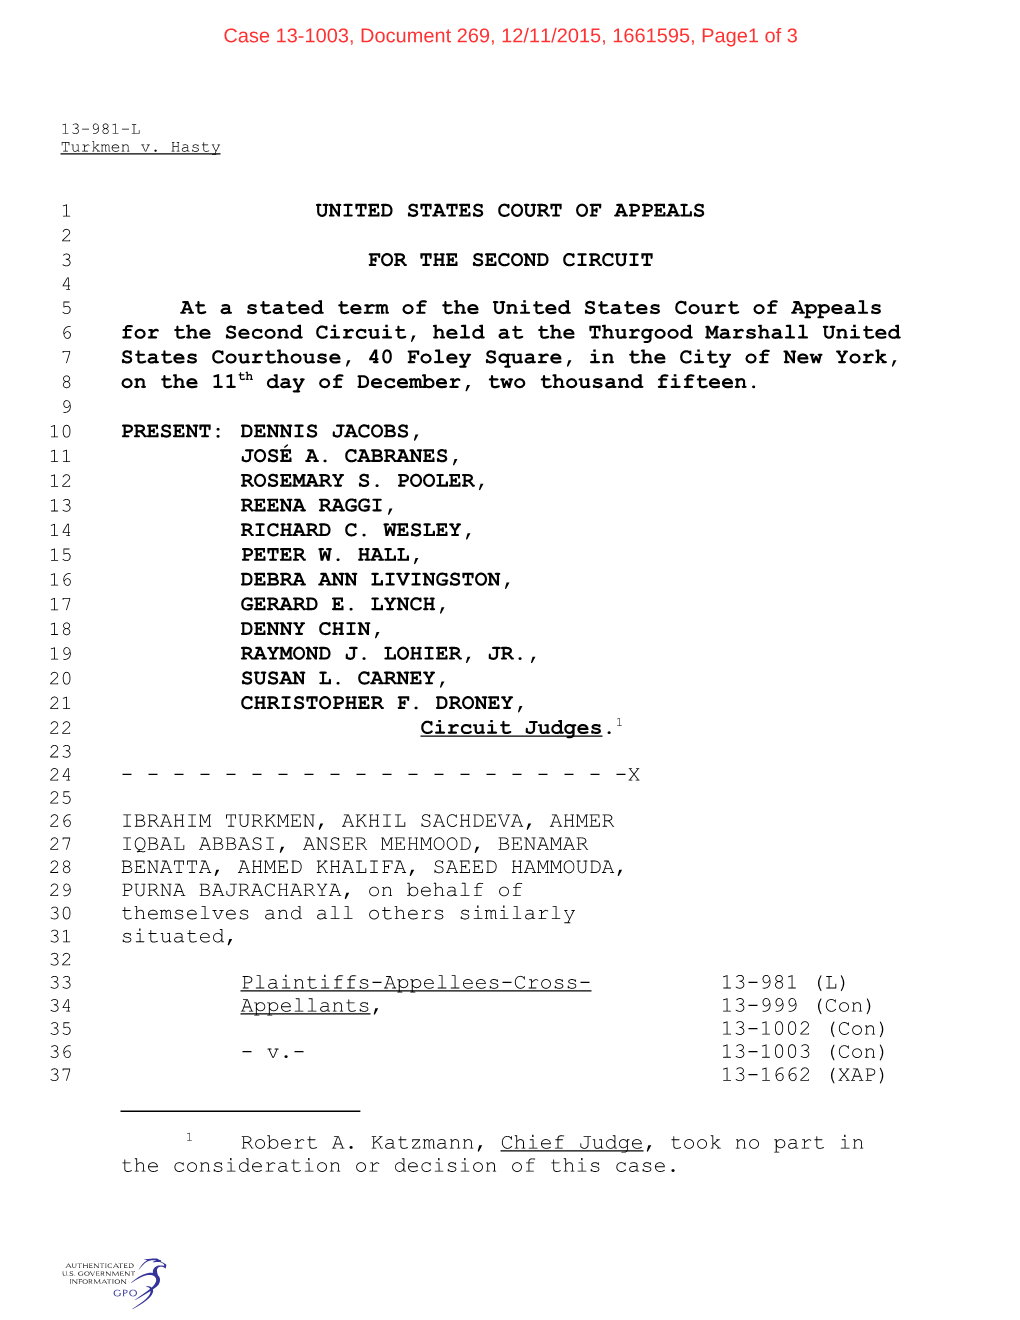 United States Court of Appeals for the Second